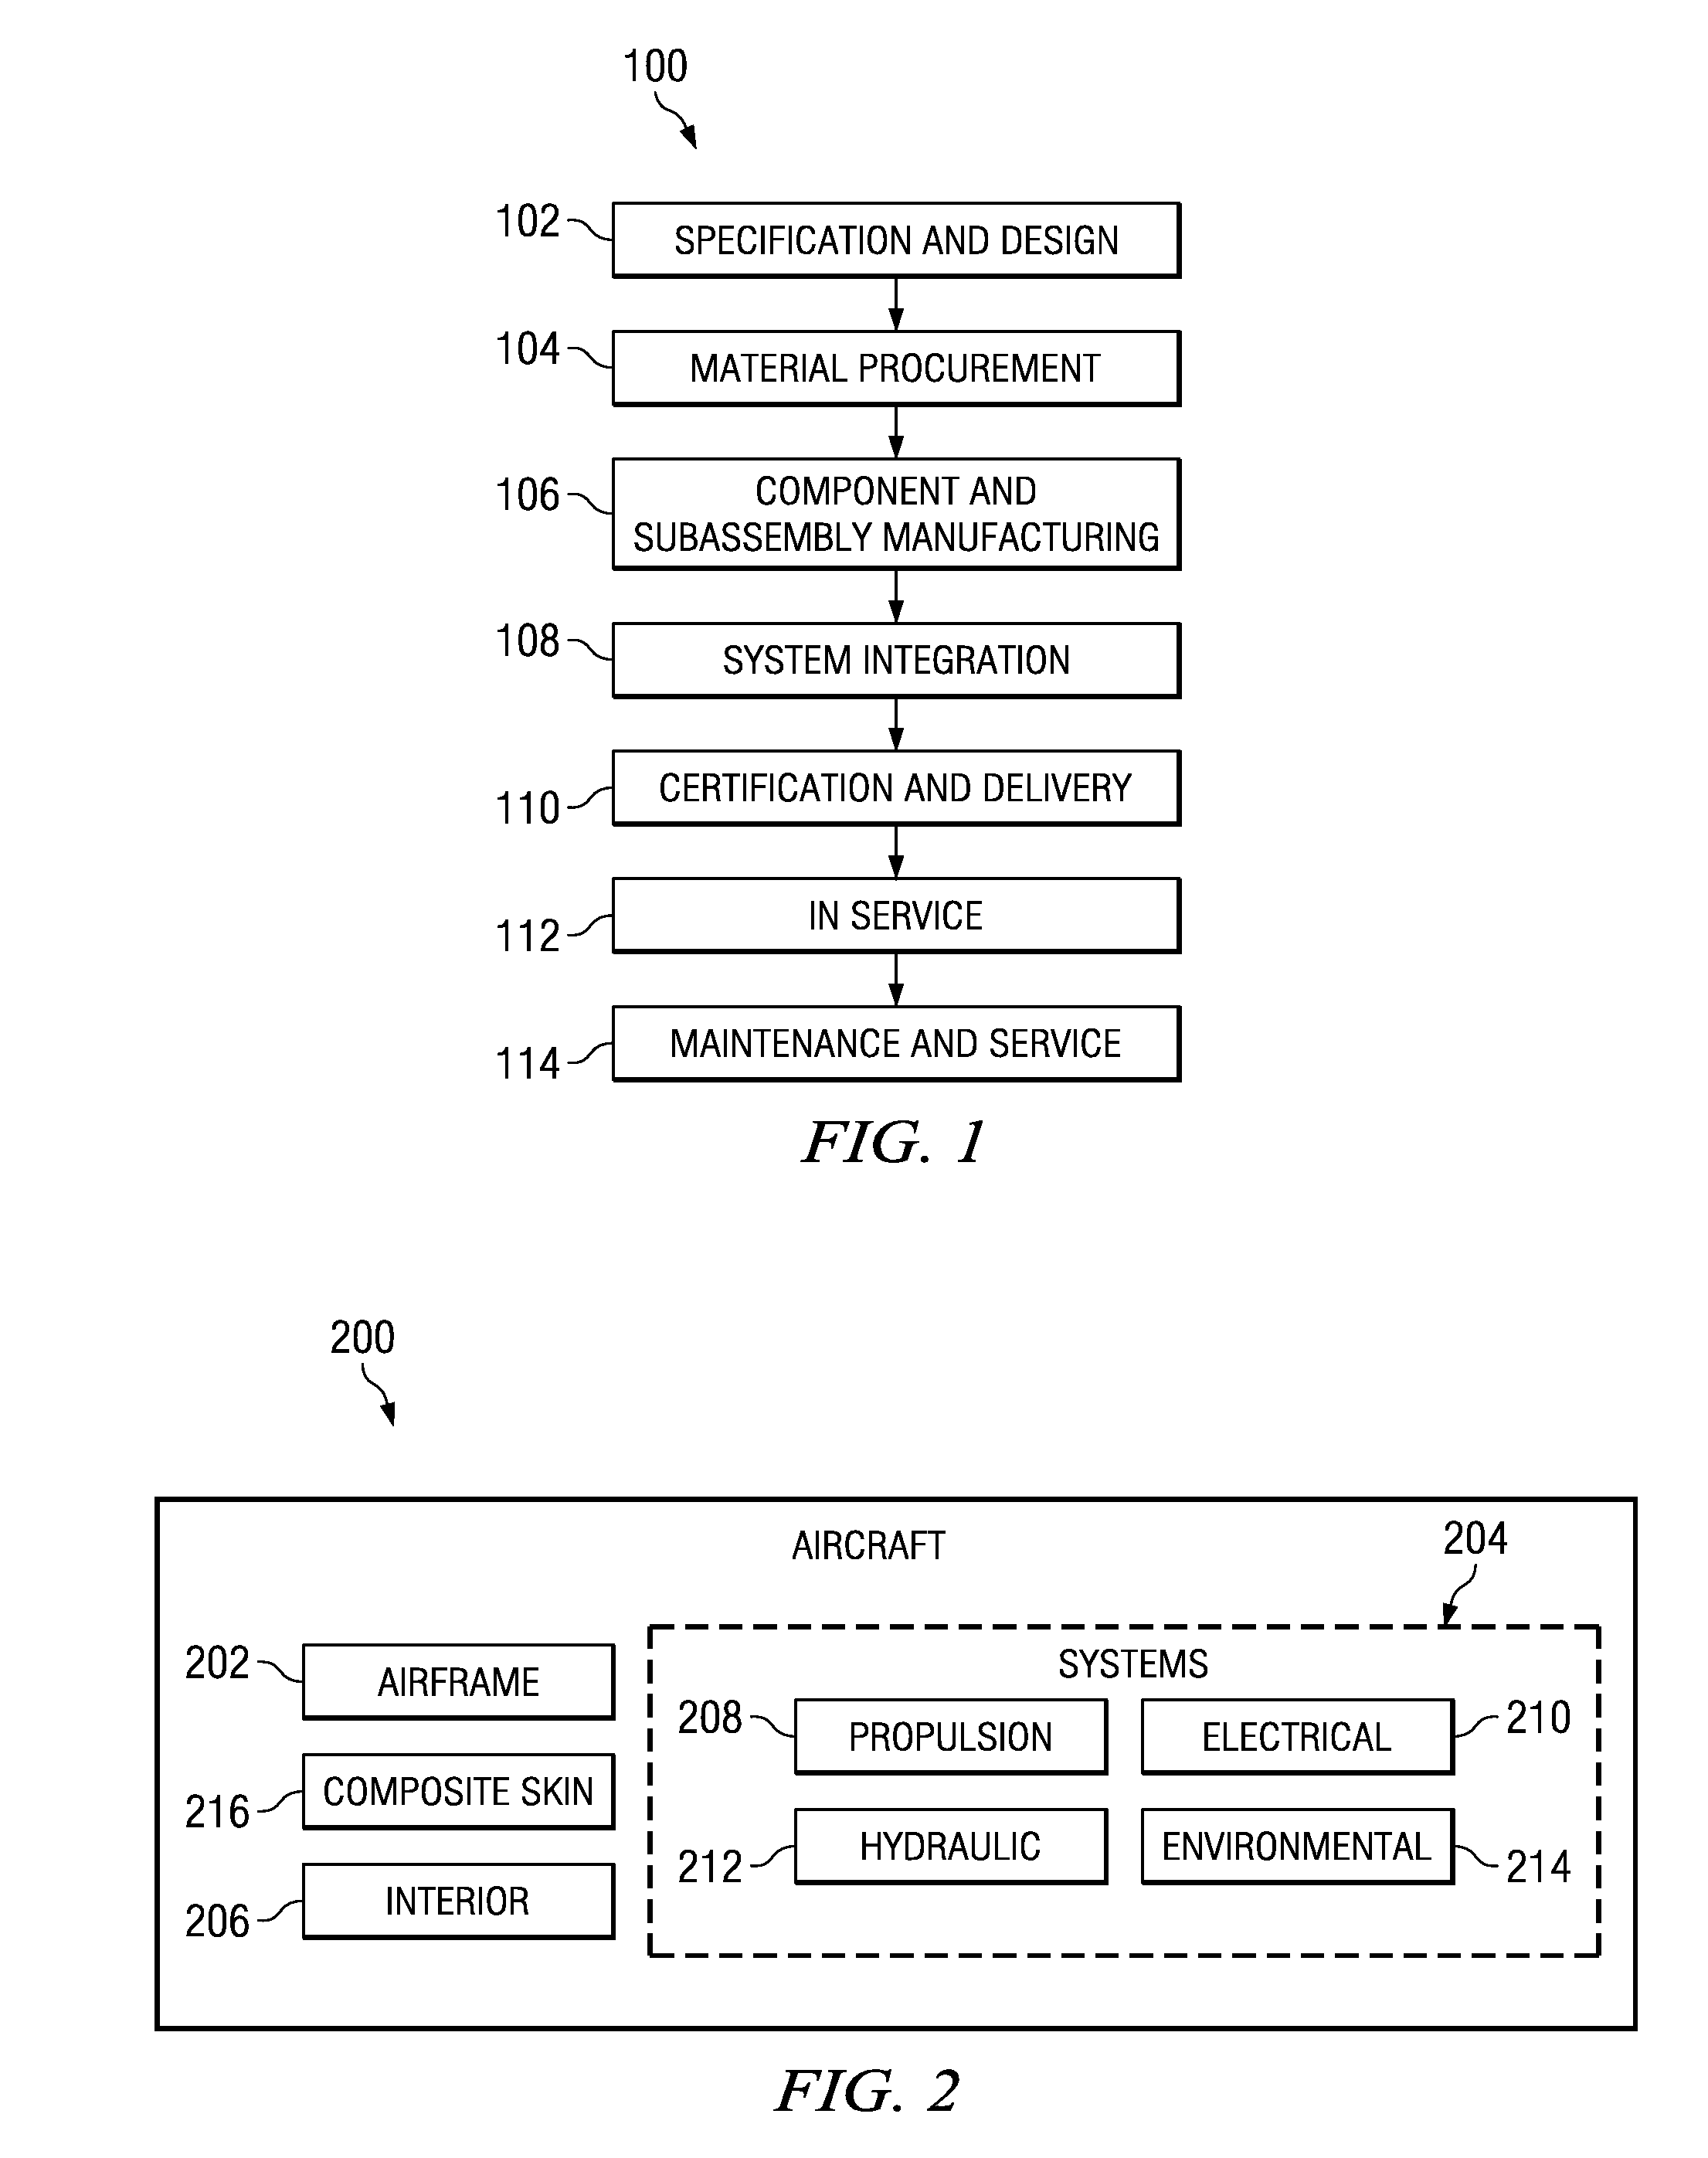 Method and apparatus for lightning protection of a composite structure